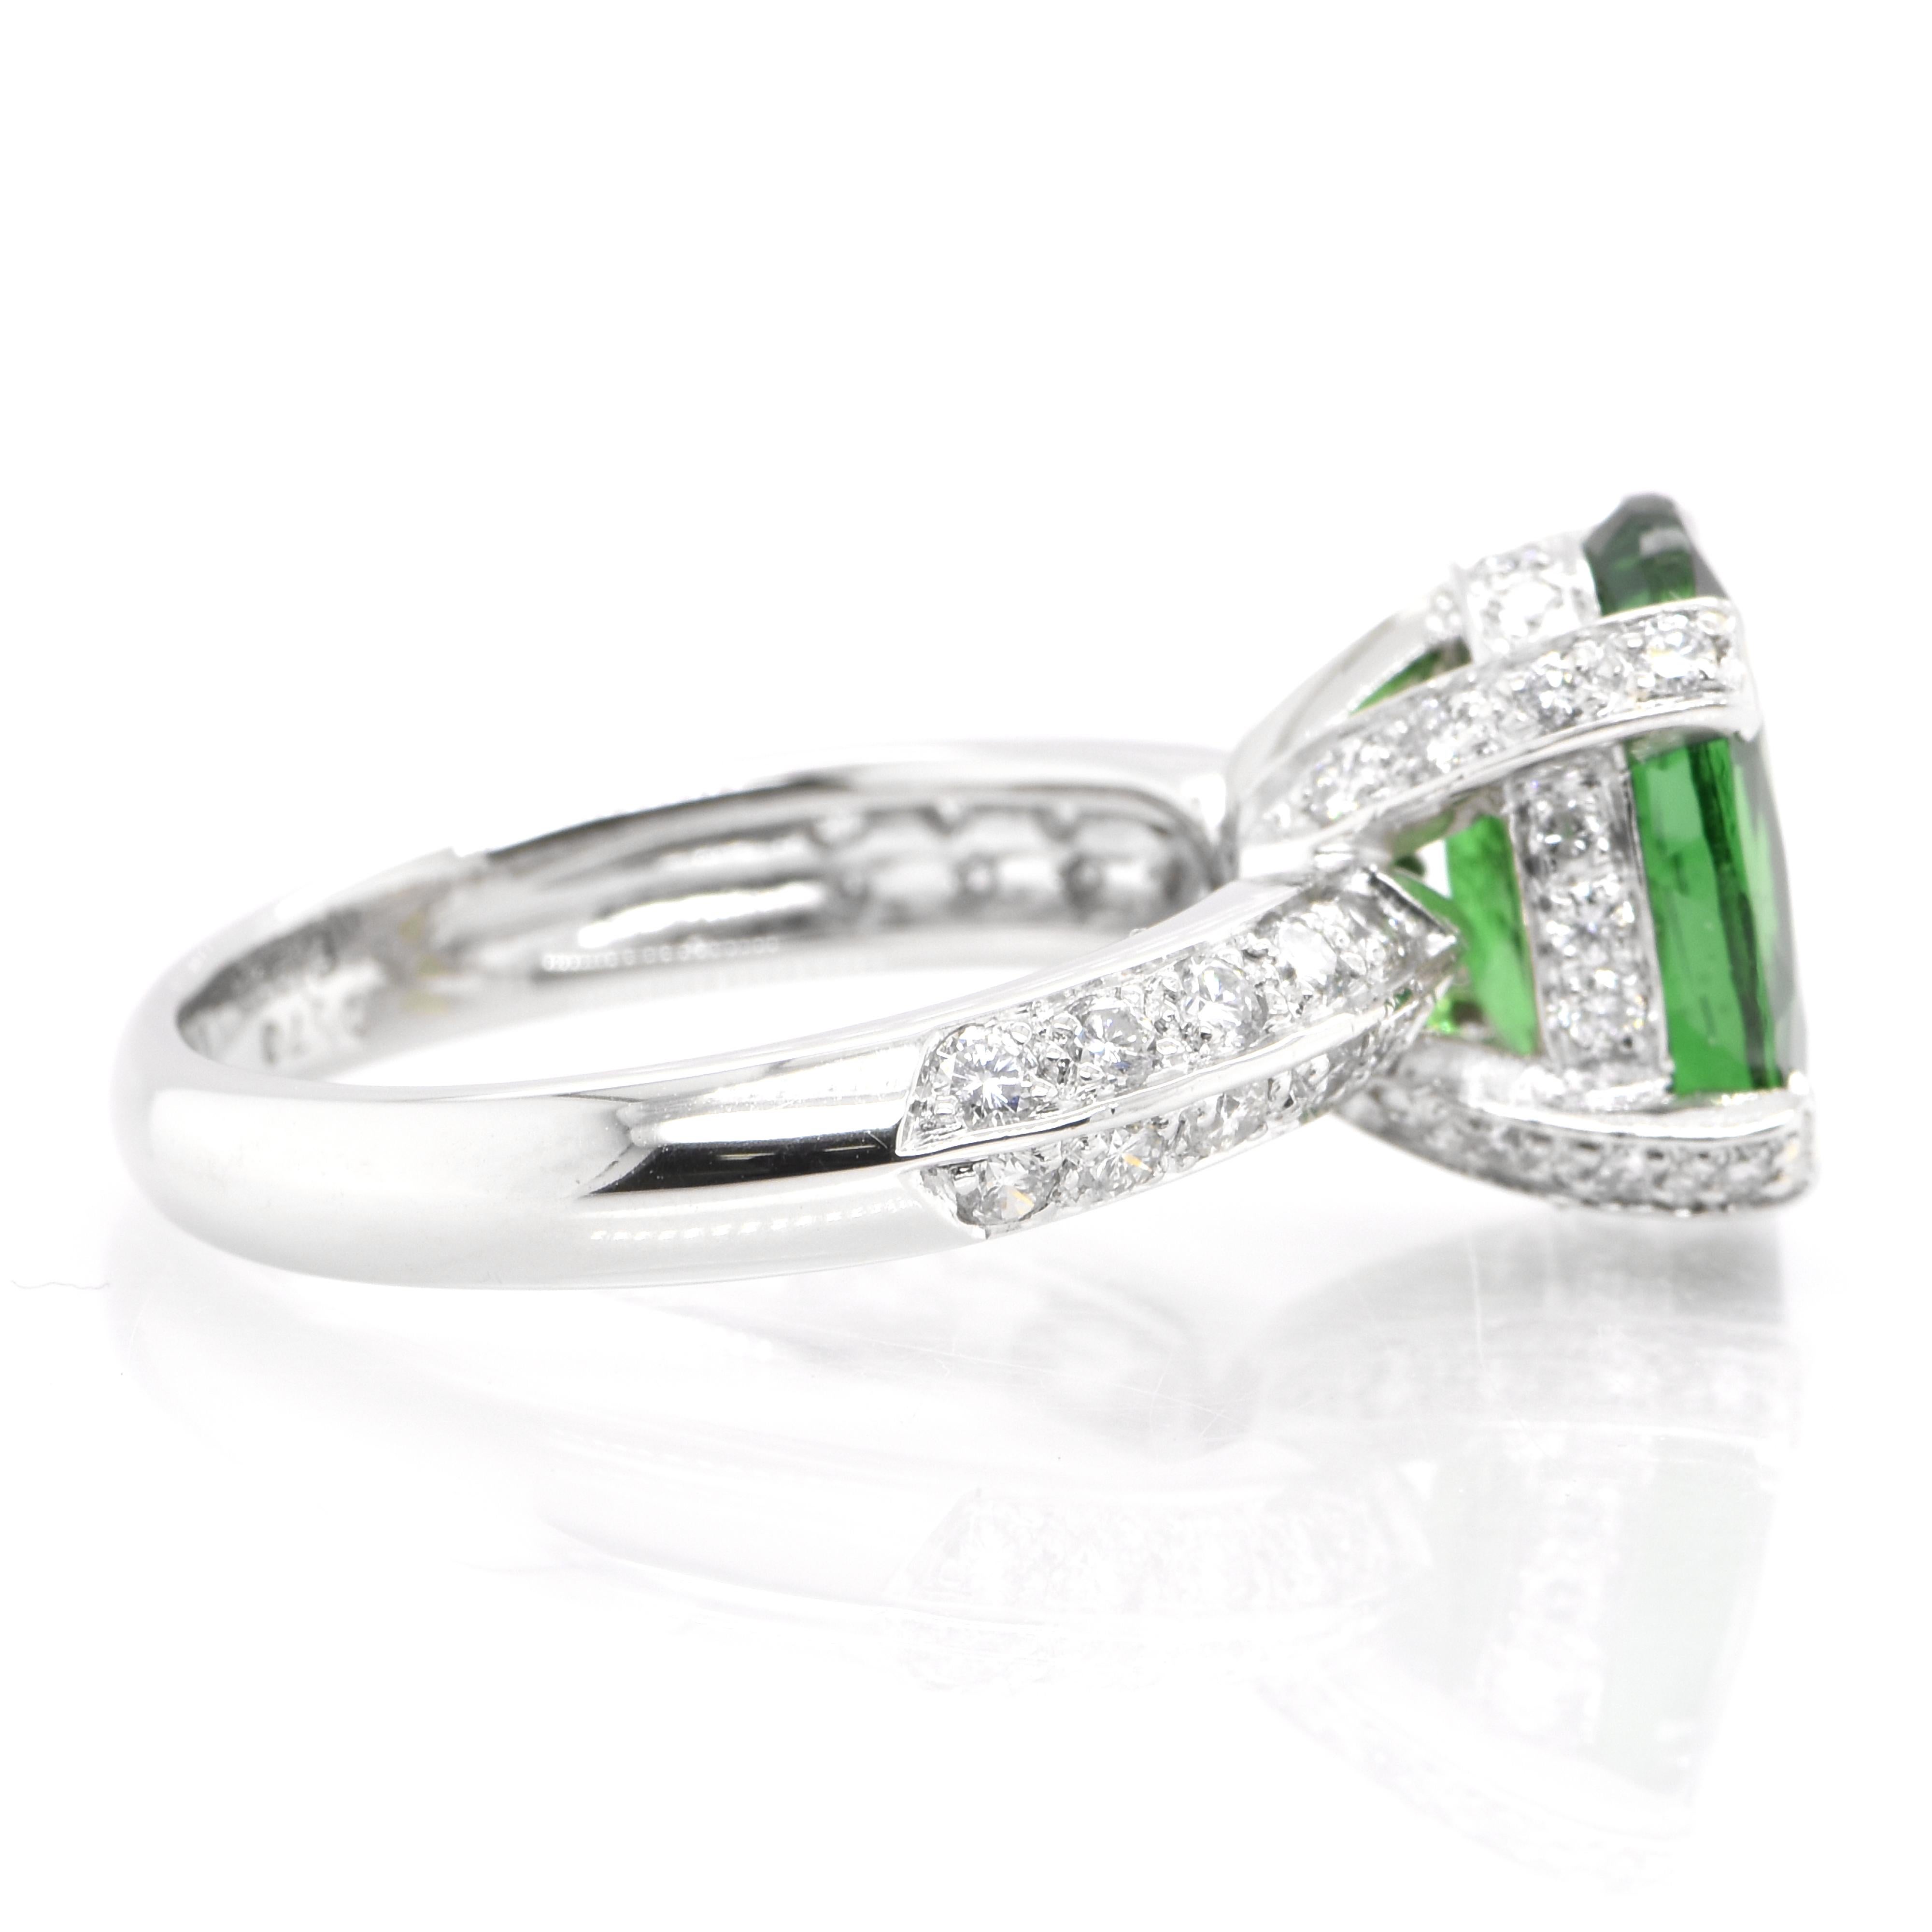 4.62 Carat Natural Tsavorite Garnet and Diamond Ring Set in Platinum In New Condition For Sale In Tokyo, JP